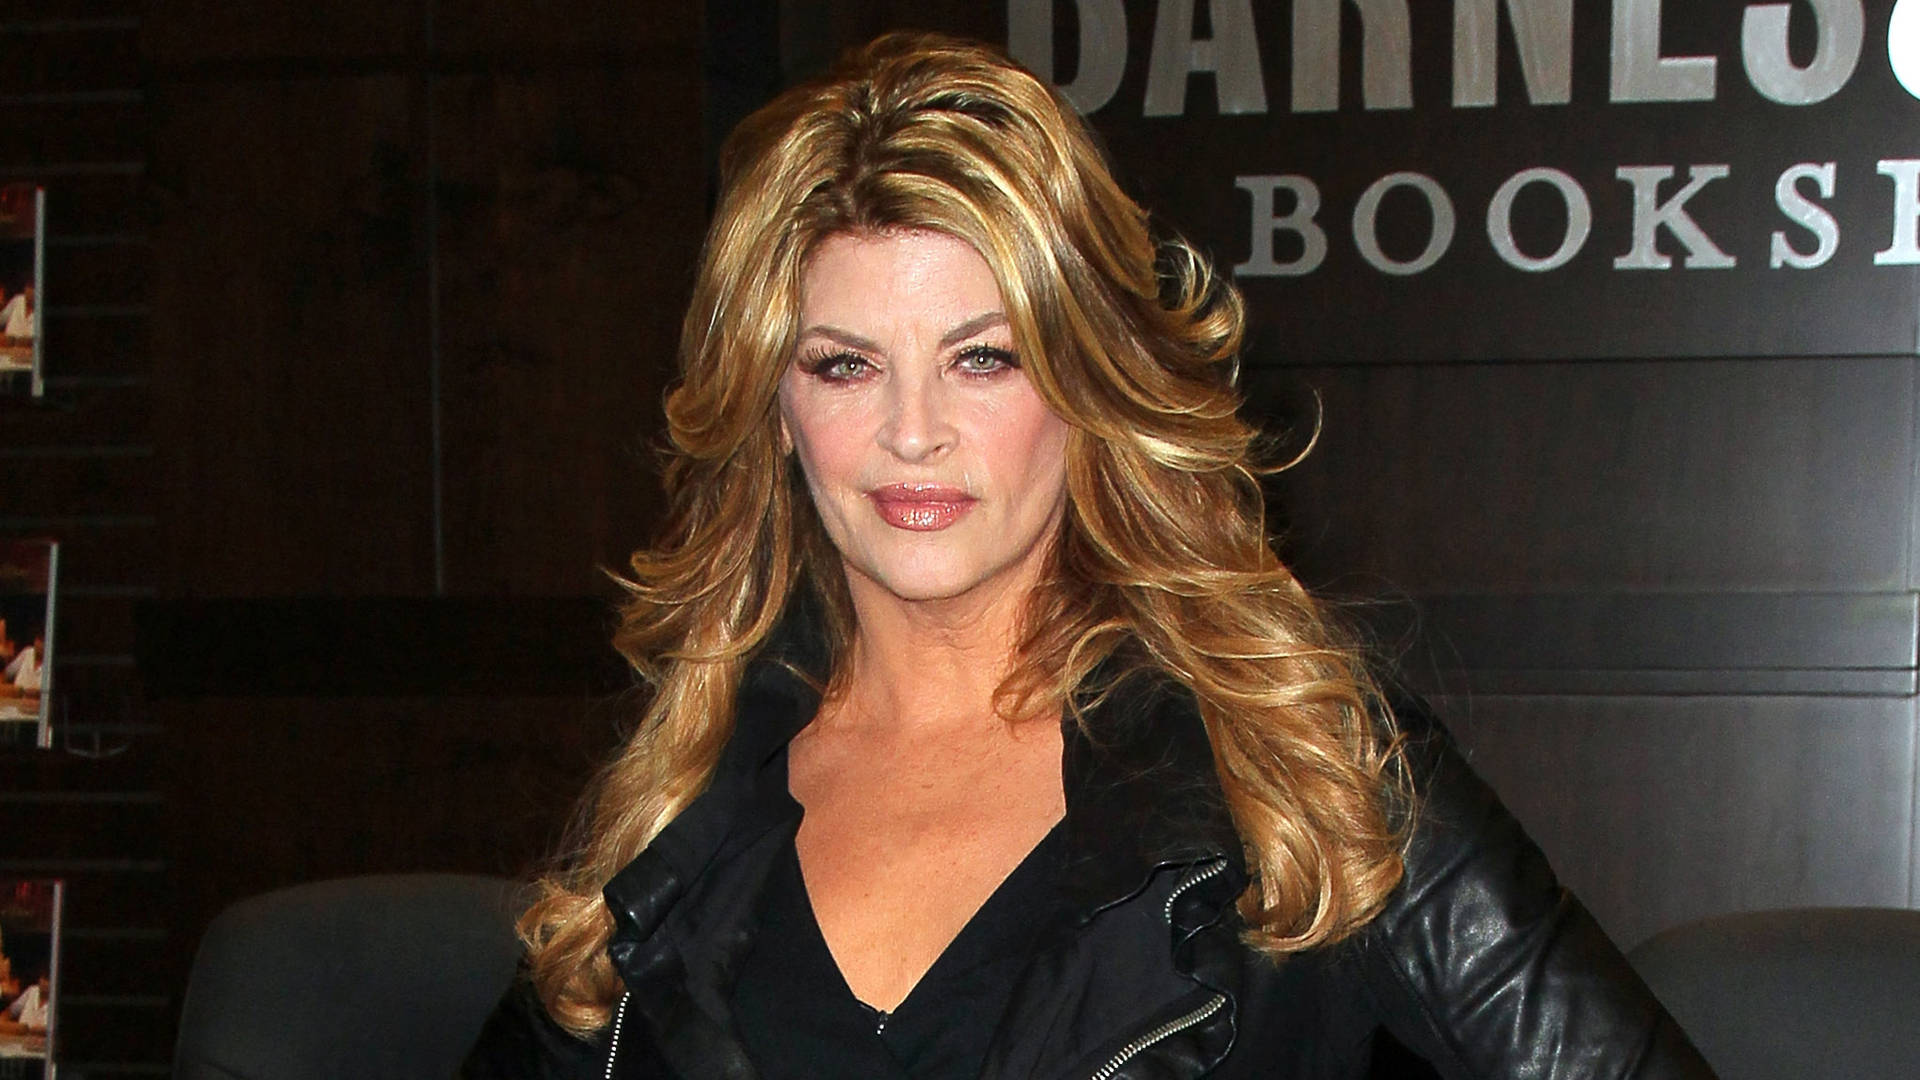 Blonde Kirstie Alley At Book Signing Event Background